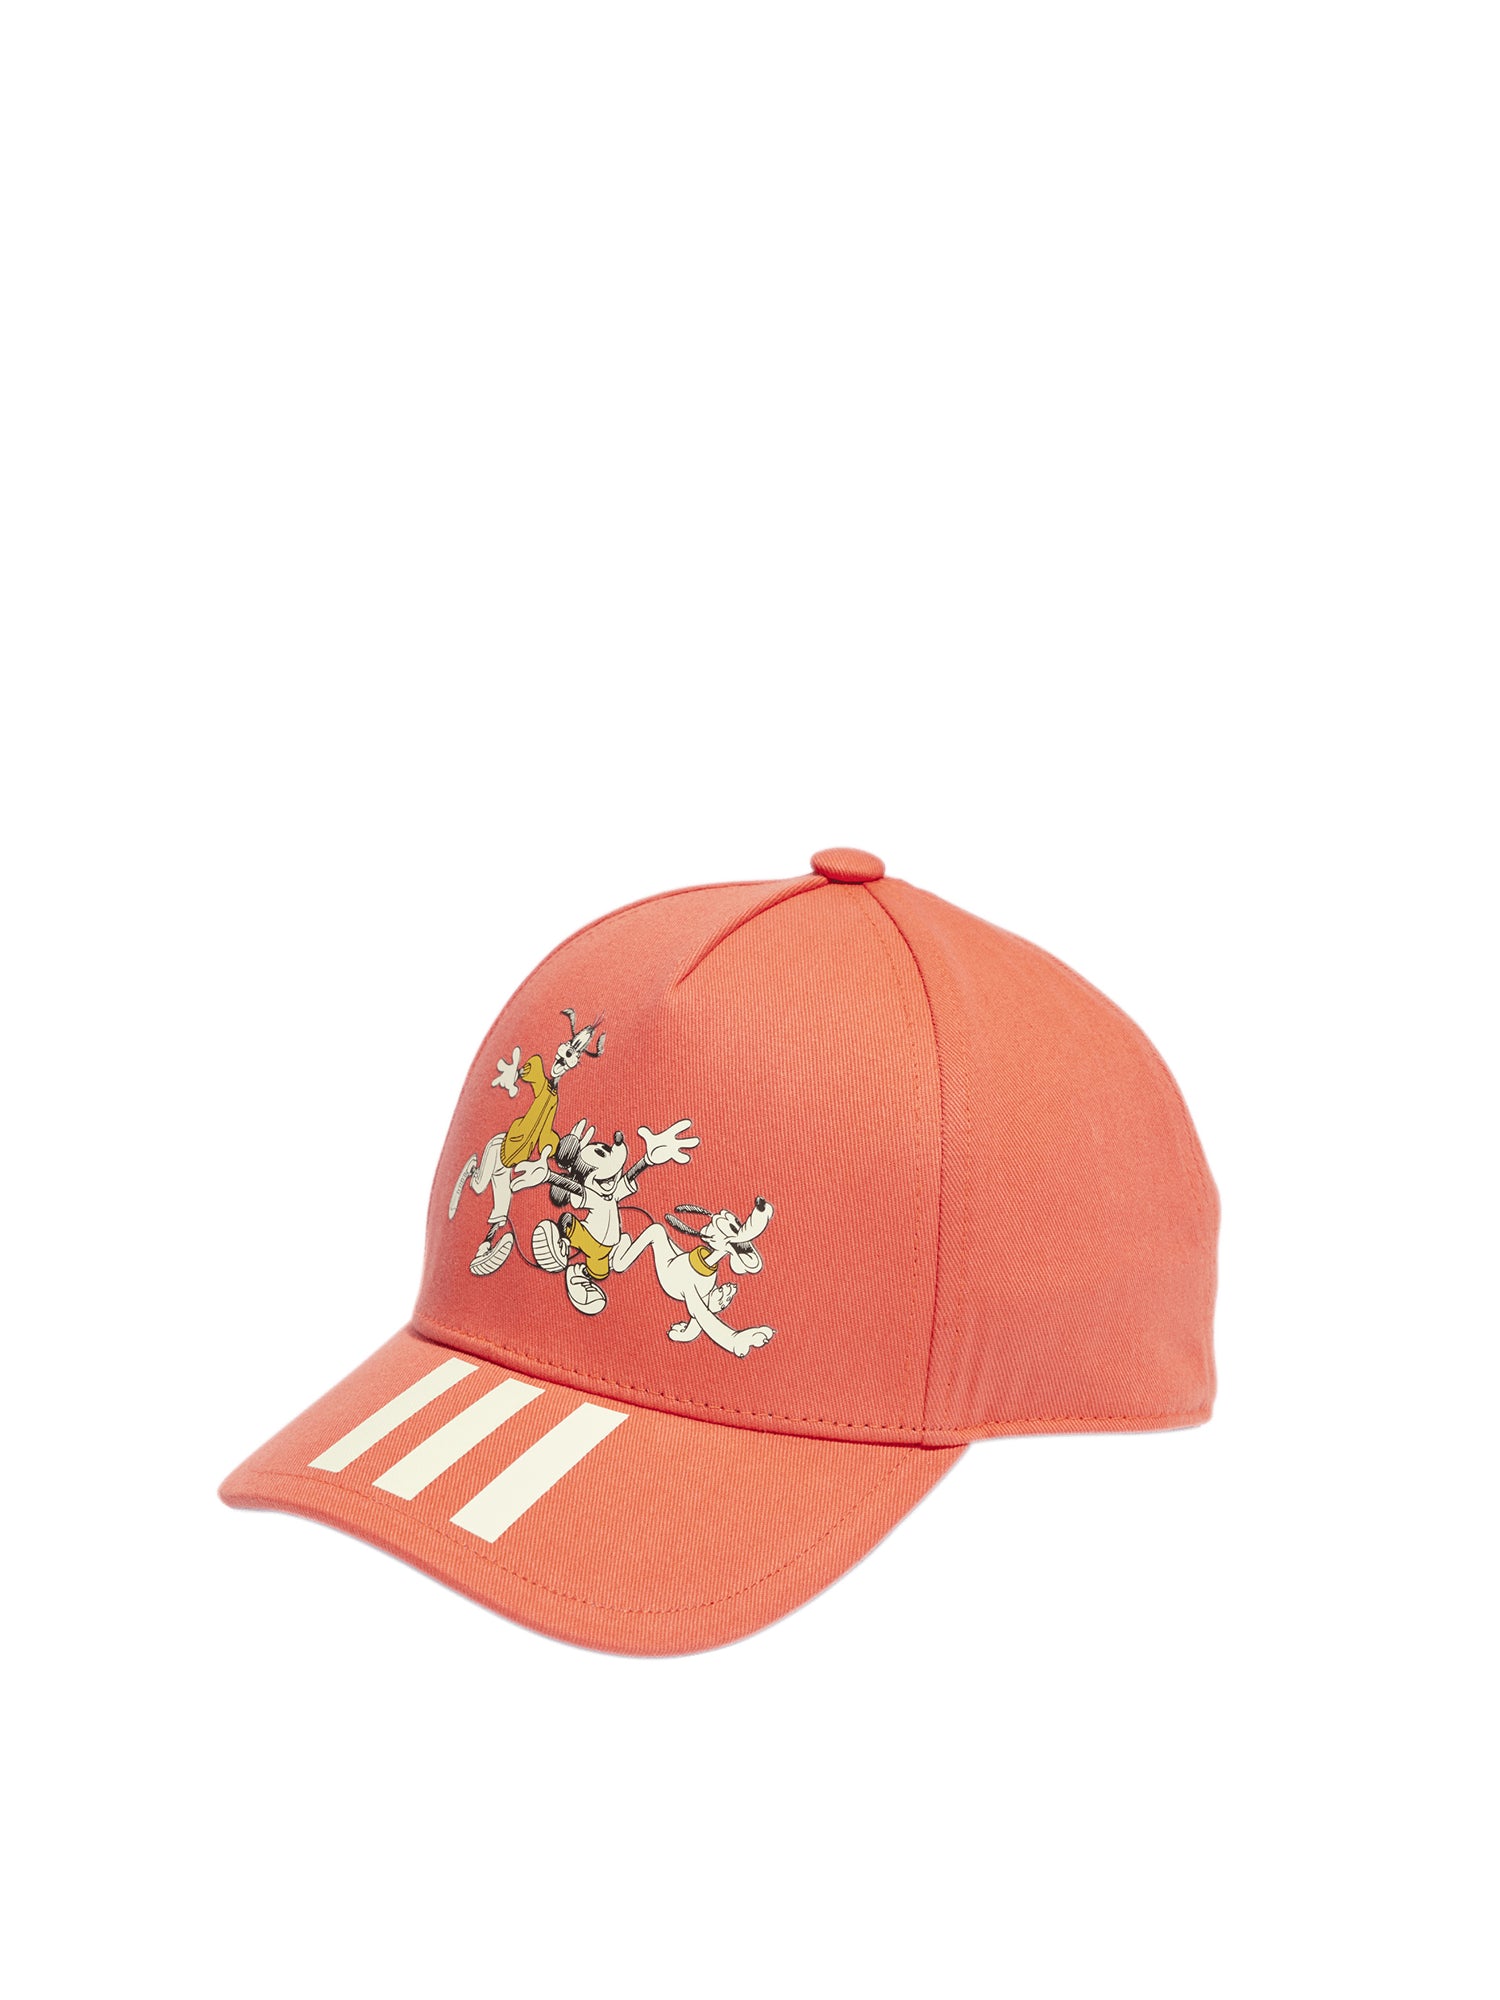 ADIDAS CAPPELLINO DISNEY'S MICKEY MOUSE KIDS ROSSO